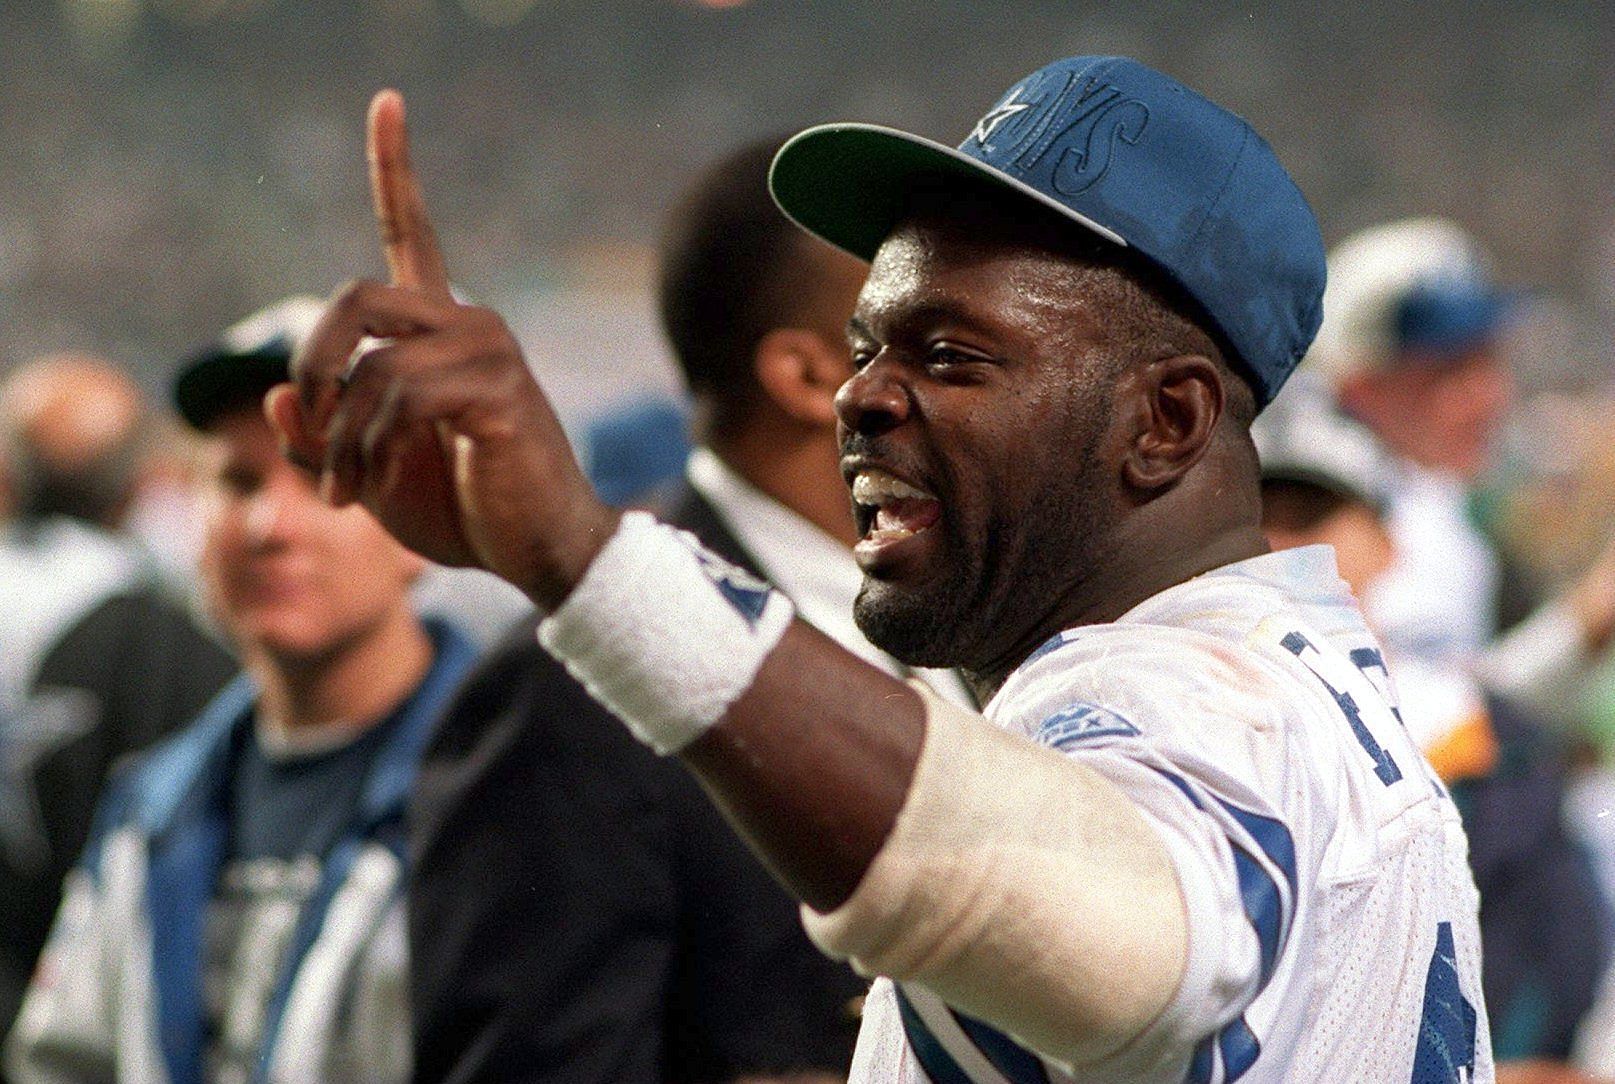 Emmitt Smith and the Cowboys picked up three Super Bowl victories during the 1990s.